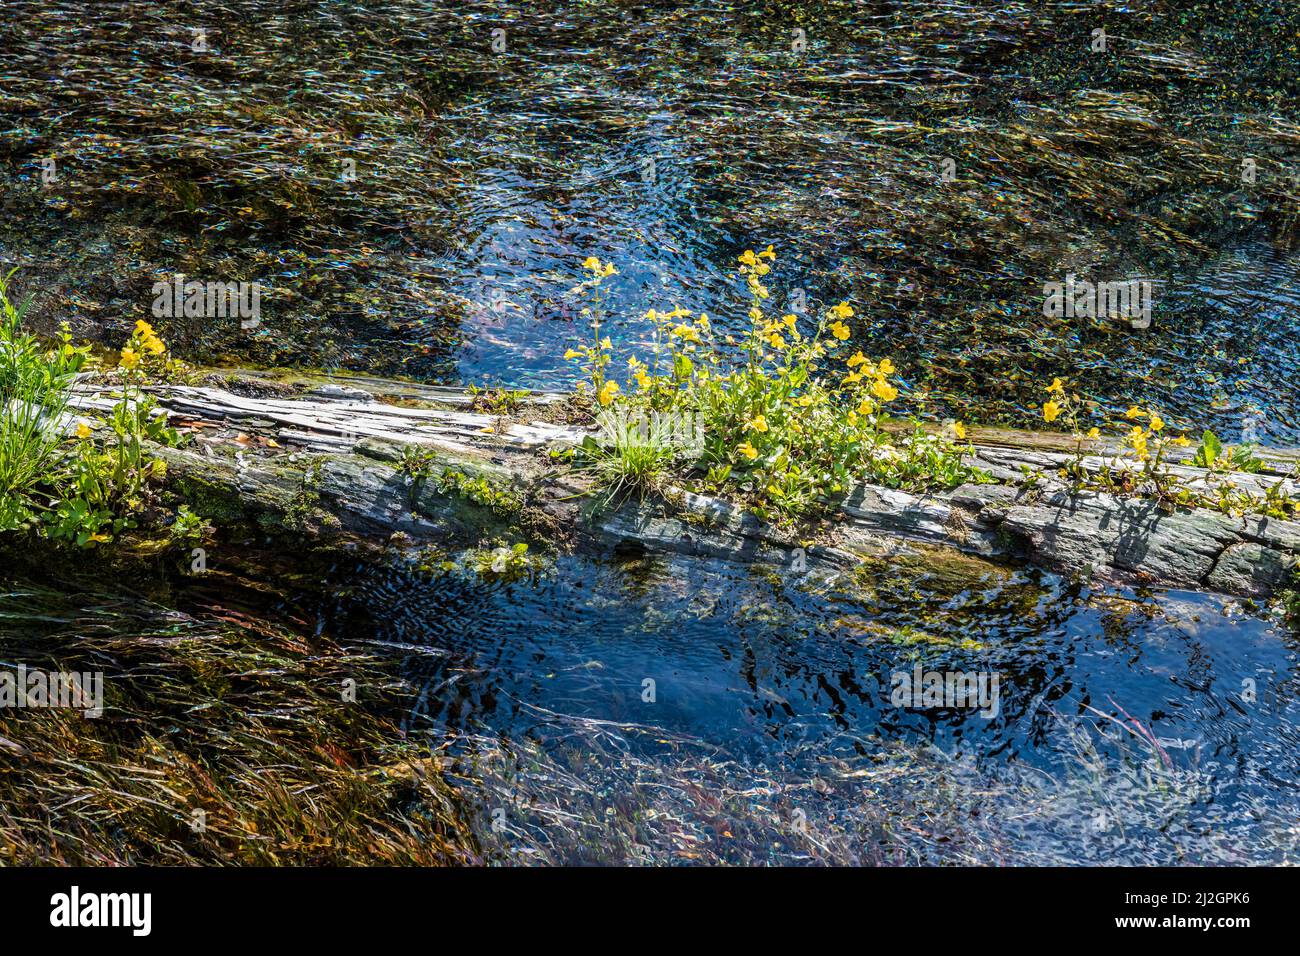 A log with yellow flowers on top in Big Spring at the headwaters of the Henry' Fork of the Snake river, Idaho. Stock Photo